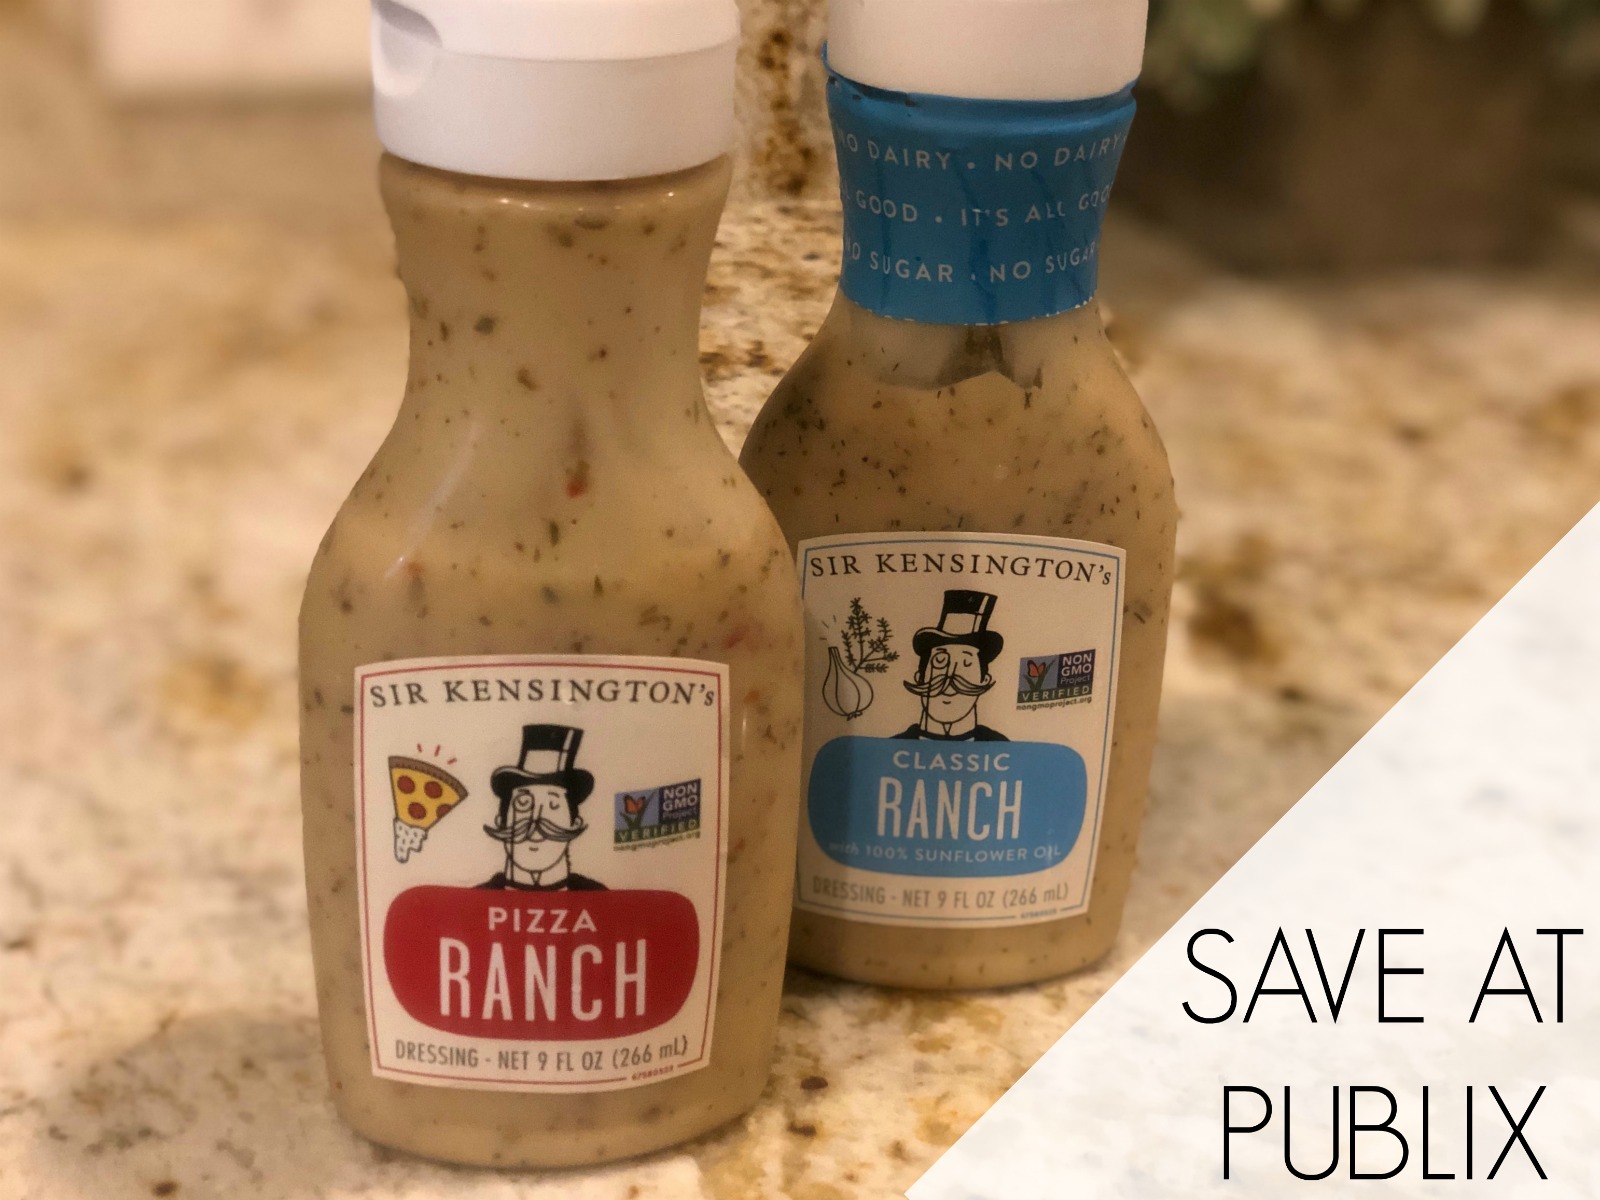 Try Sir Kensington’s Ranch And Save $1 With The Ibotta Offer – Two Varieties At Publix